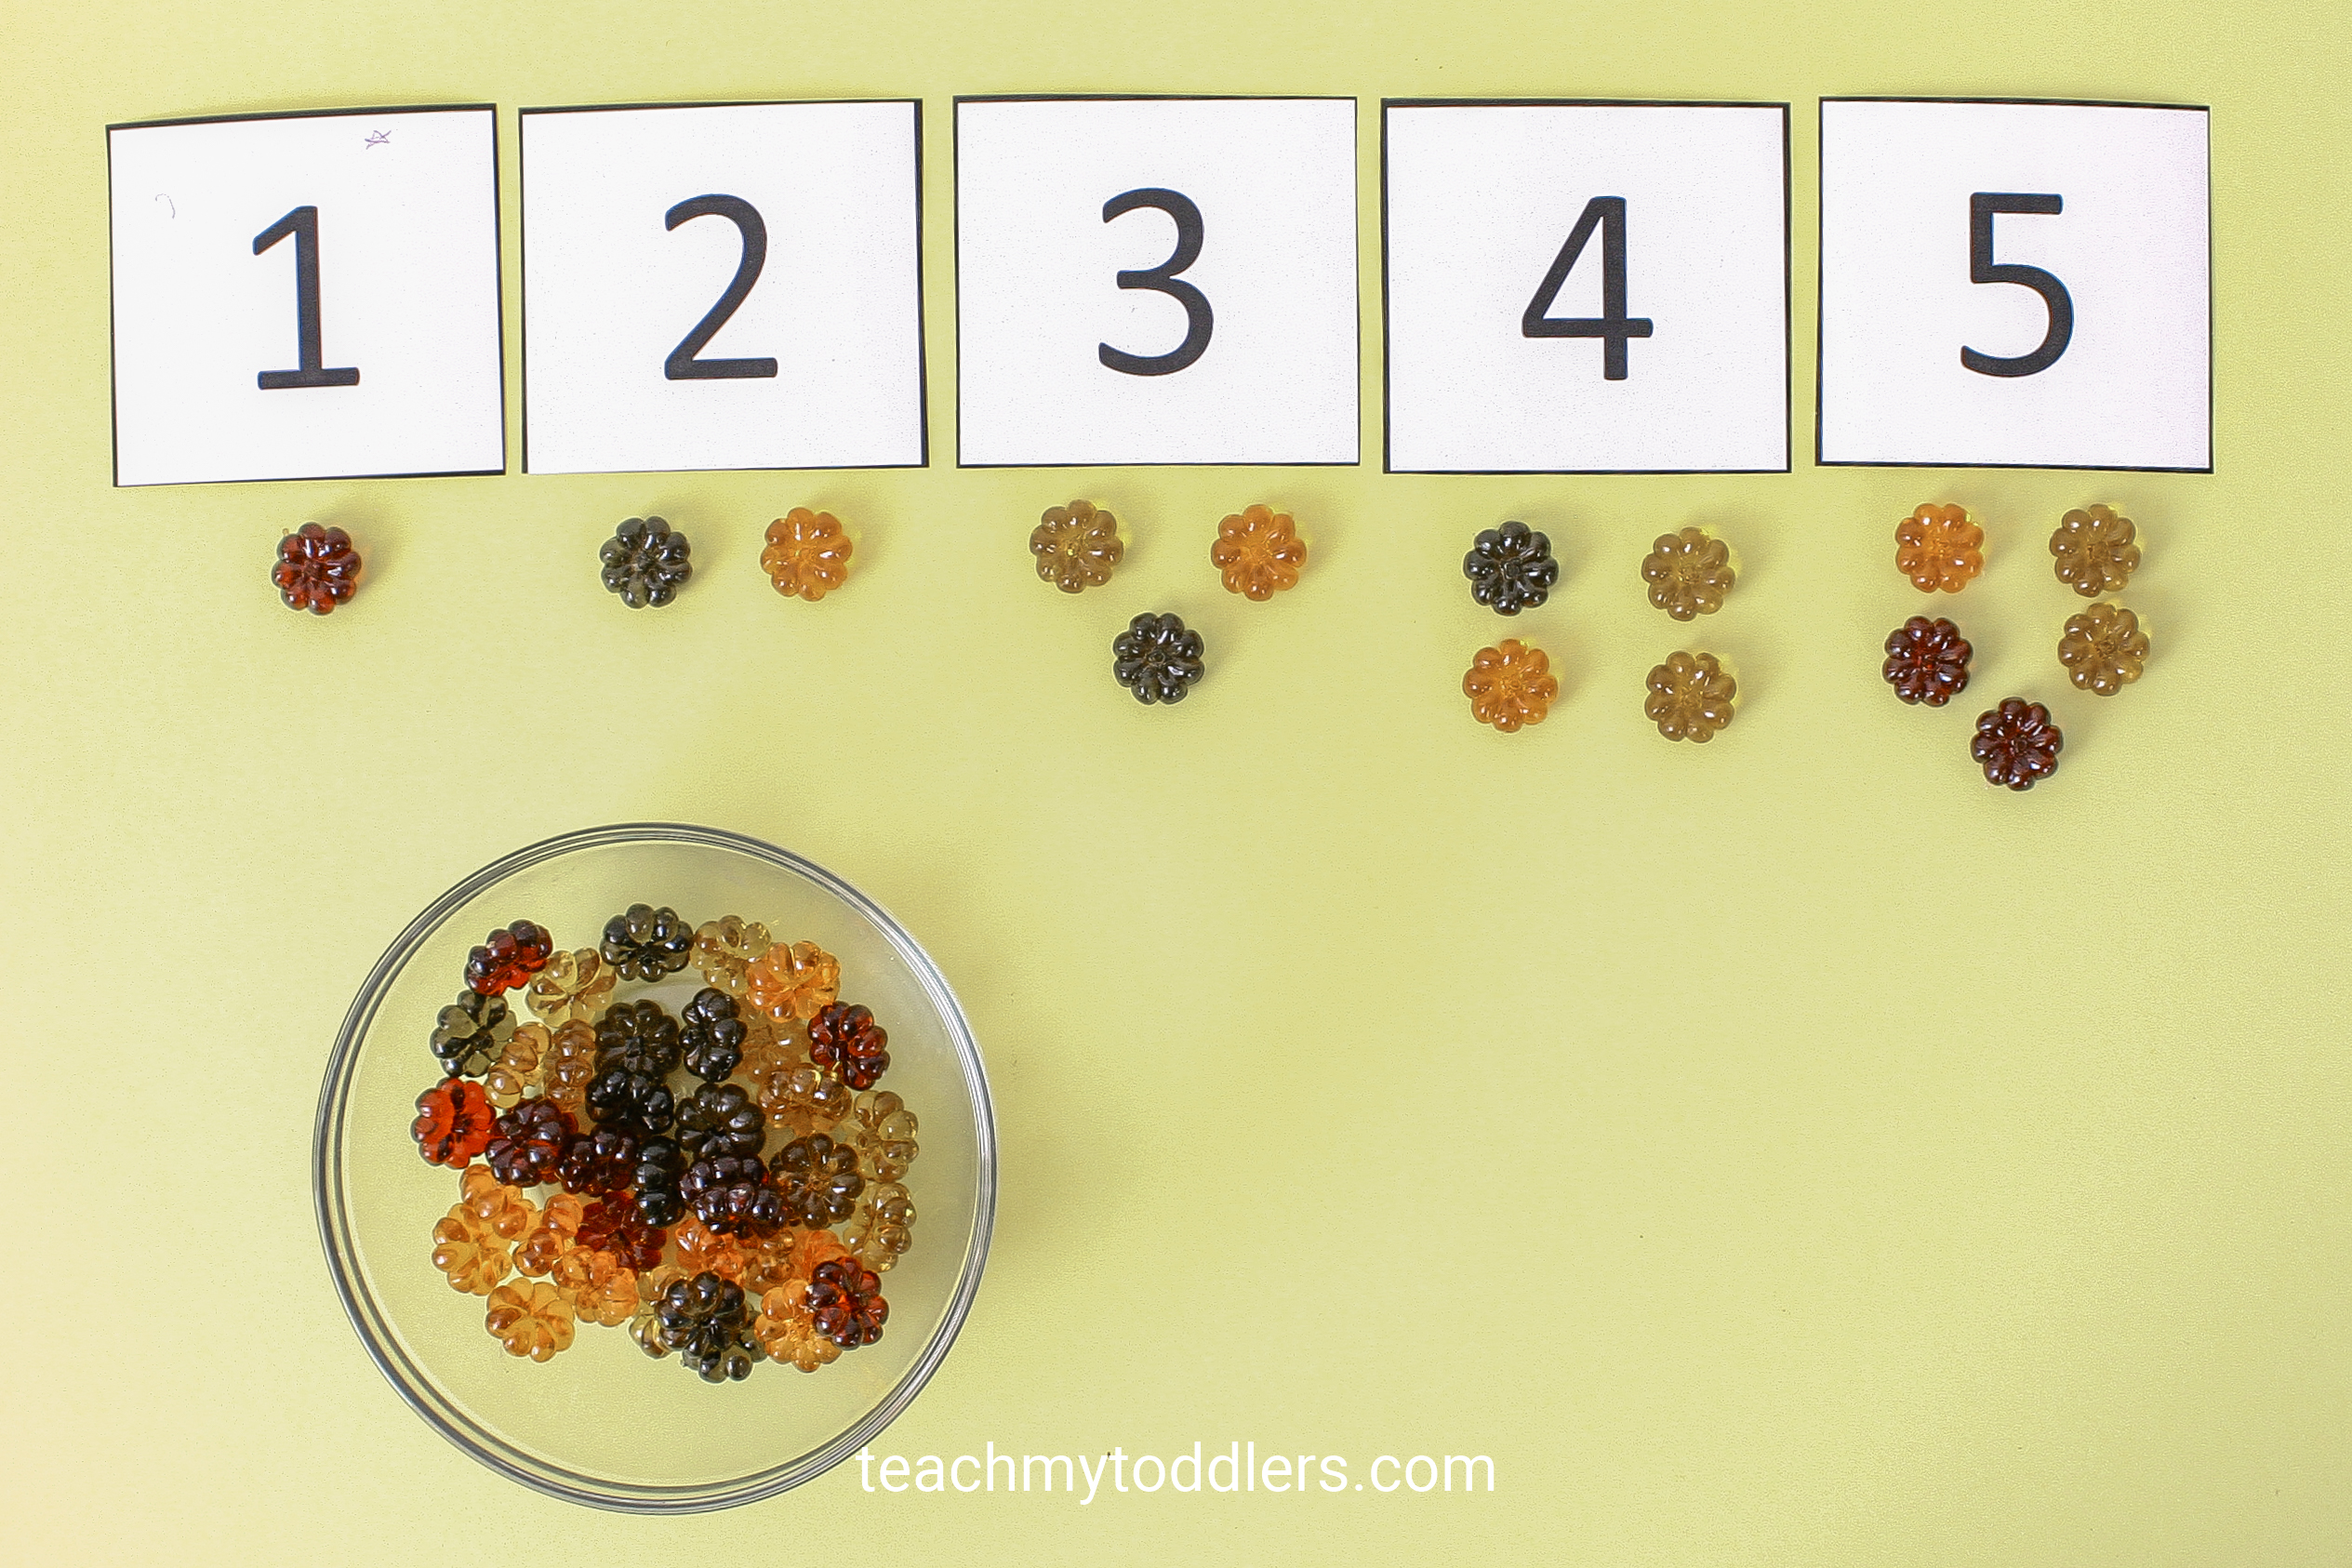 Discover how to use these table scatter activities to teach your toddlers math